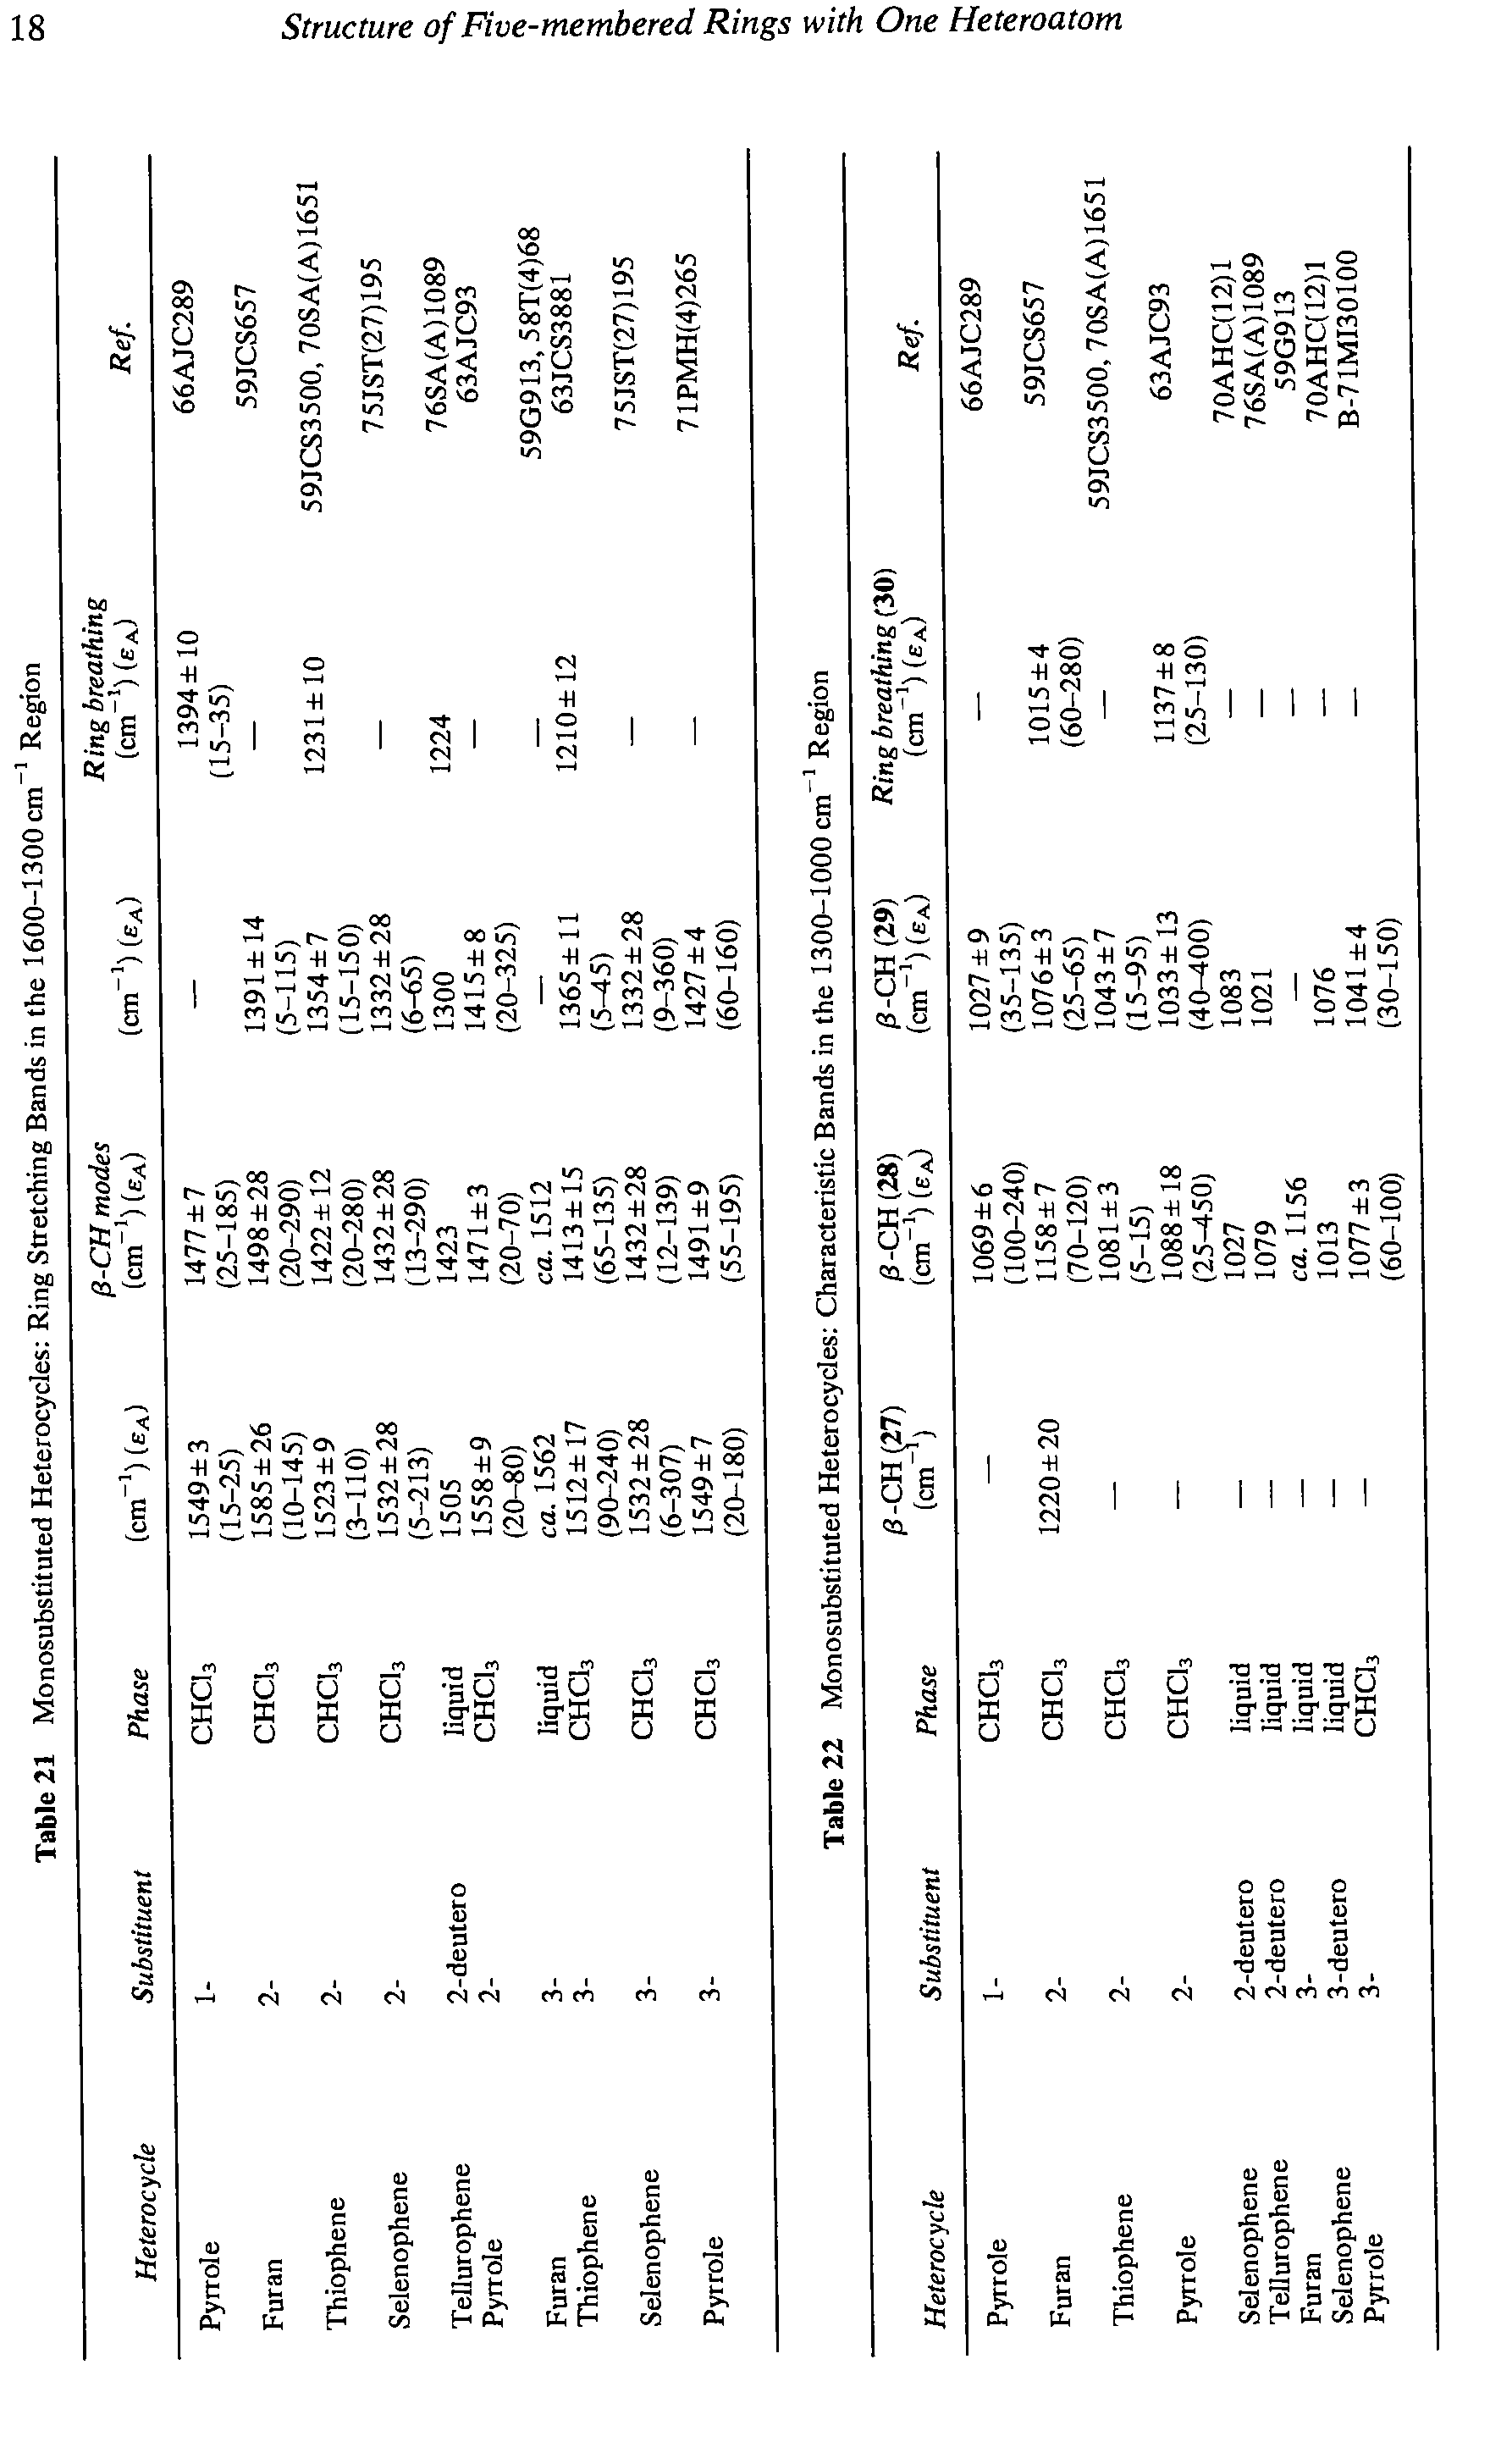 Table 22 Monosubstituted Heterocycles Characteristic Bands in the 1300-1000 cm Region...